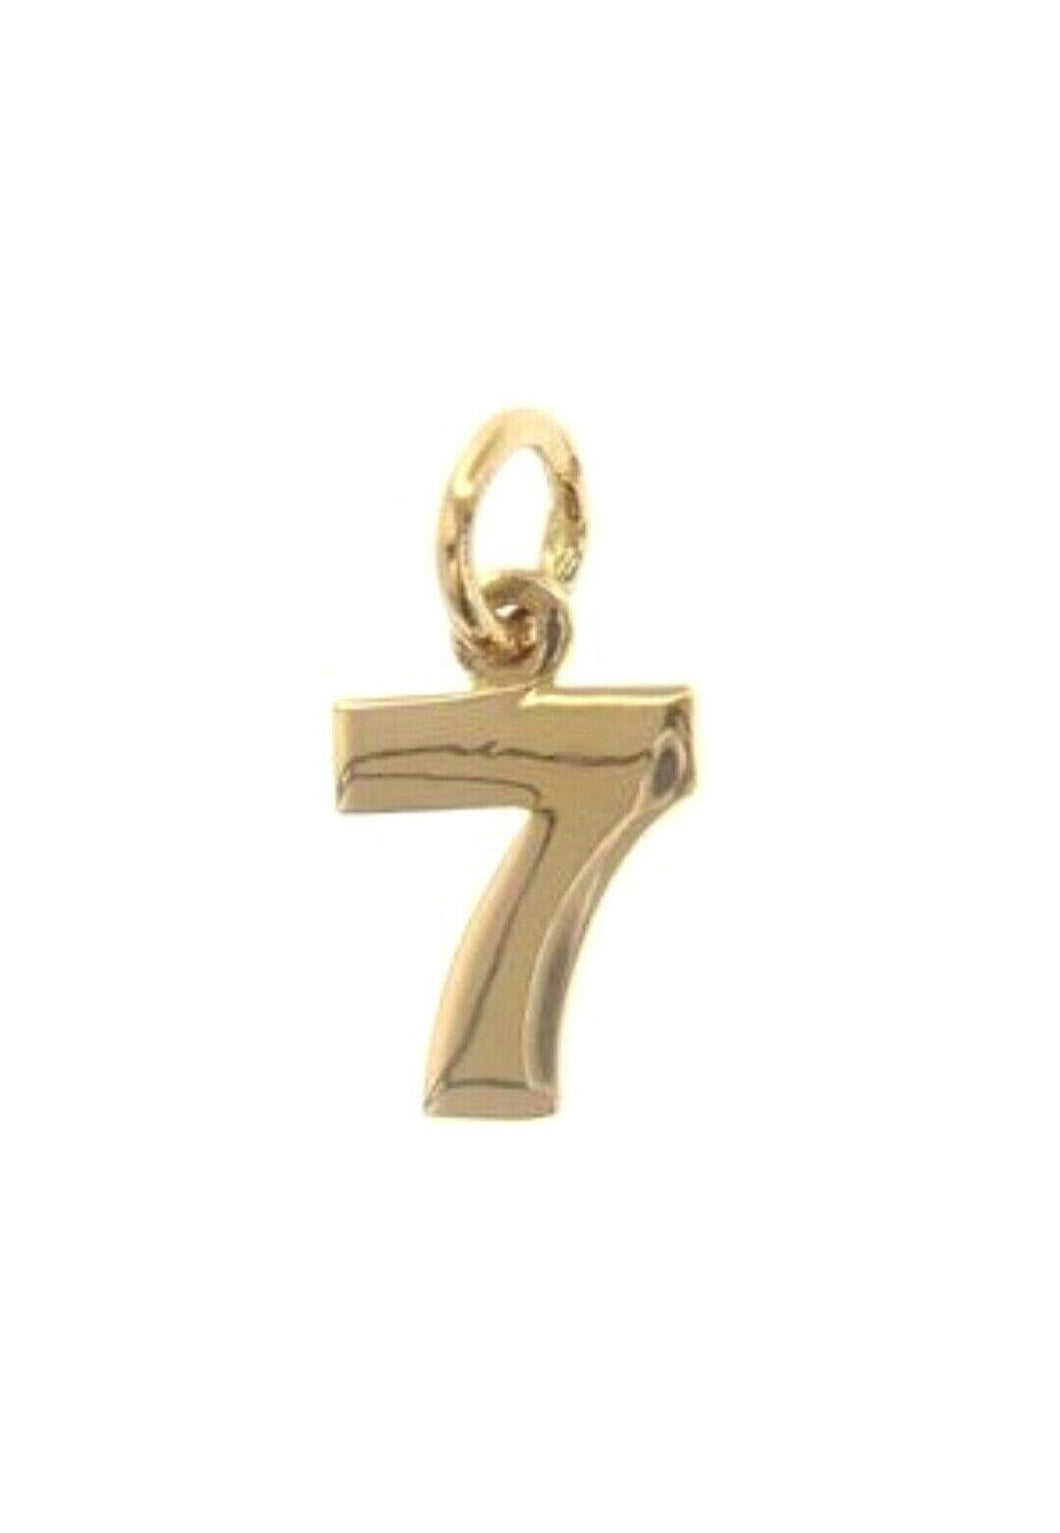 18k yellow gold number 7 seven small pendant charm, 0.4